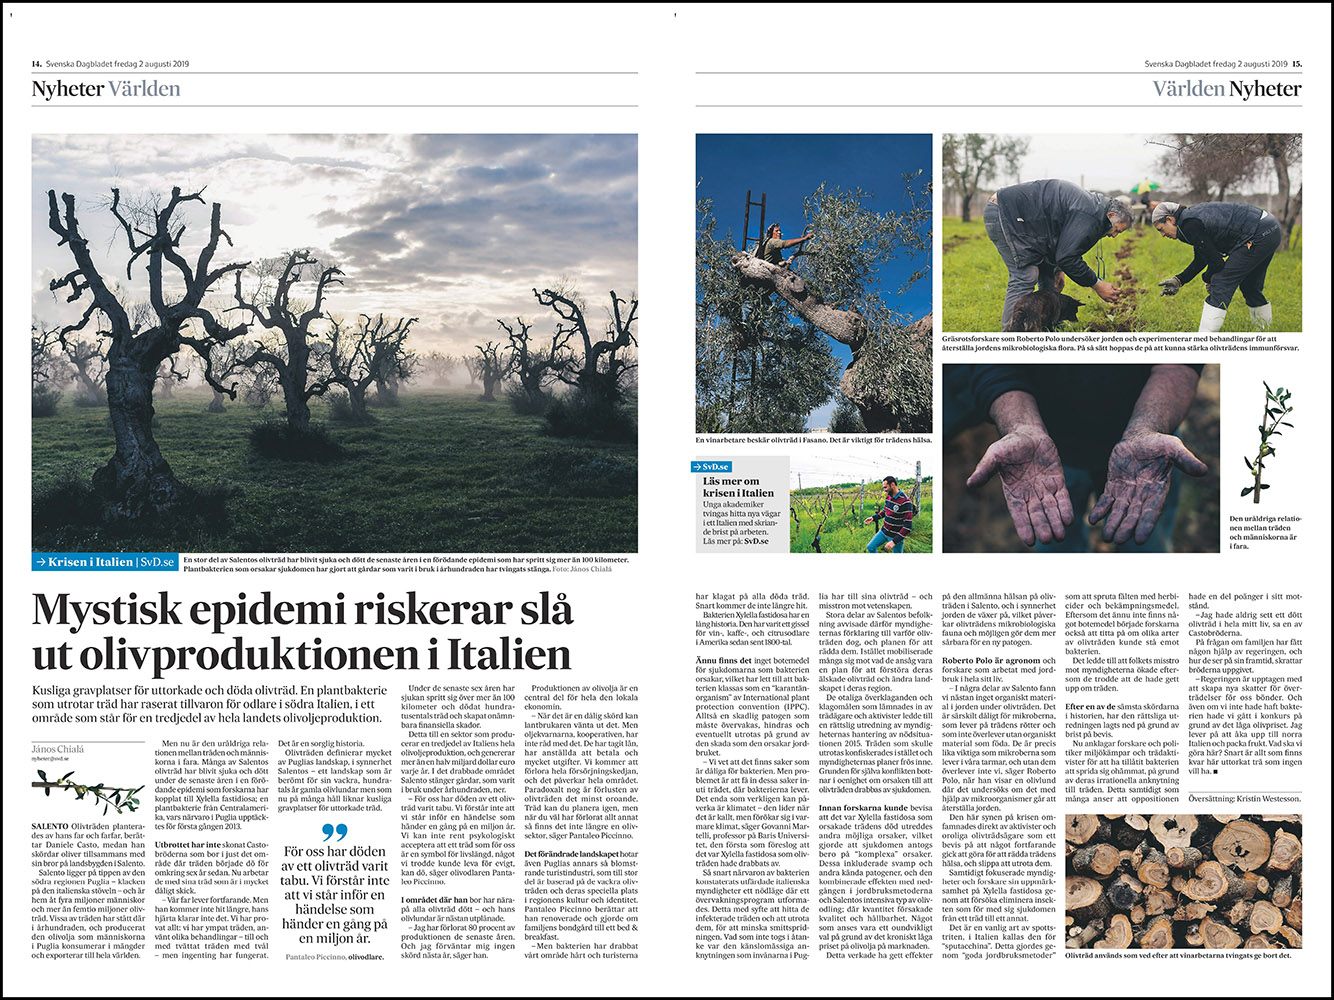 Svenska Dagbladet: The olive trees of Puglia in the time of Xylella. (July 2019)
link to story